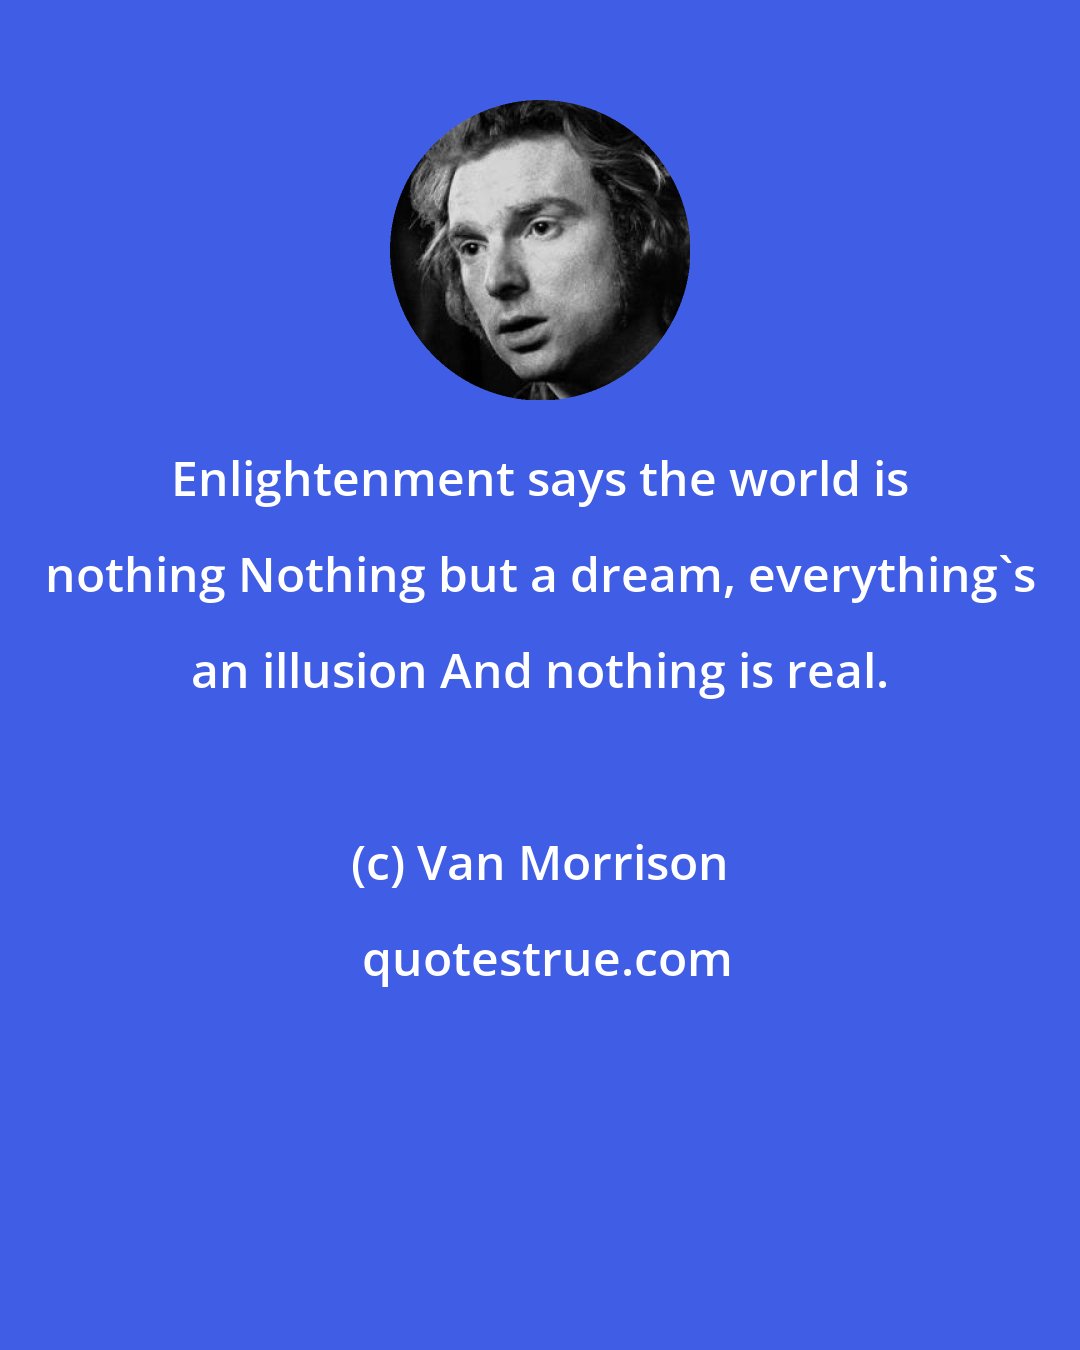 Van Morrison: Enlightenment says the world is nothing Nothing but a dream, everything's an illusion And nothing is real.